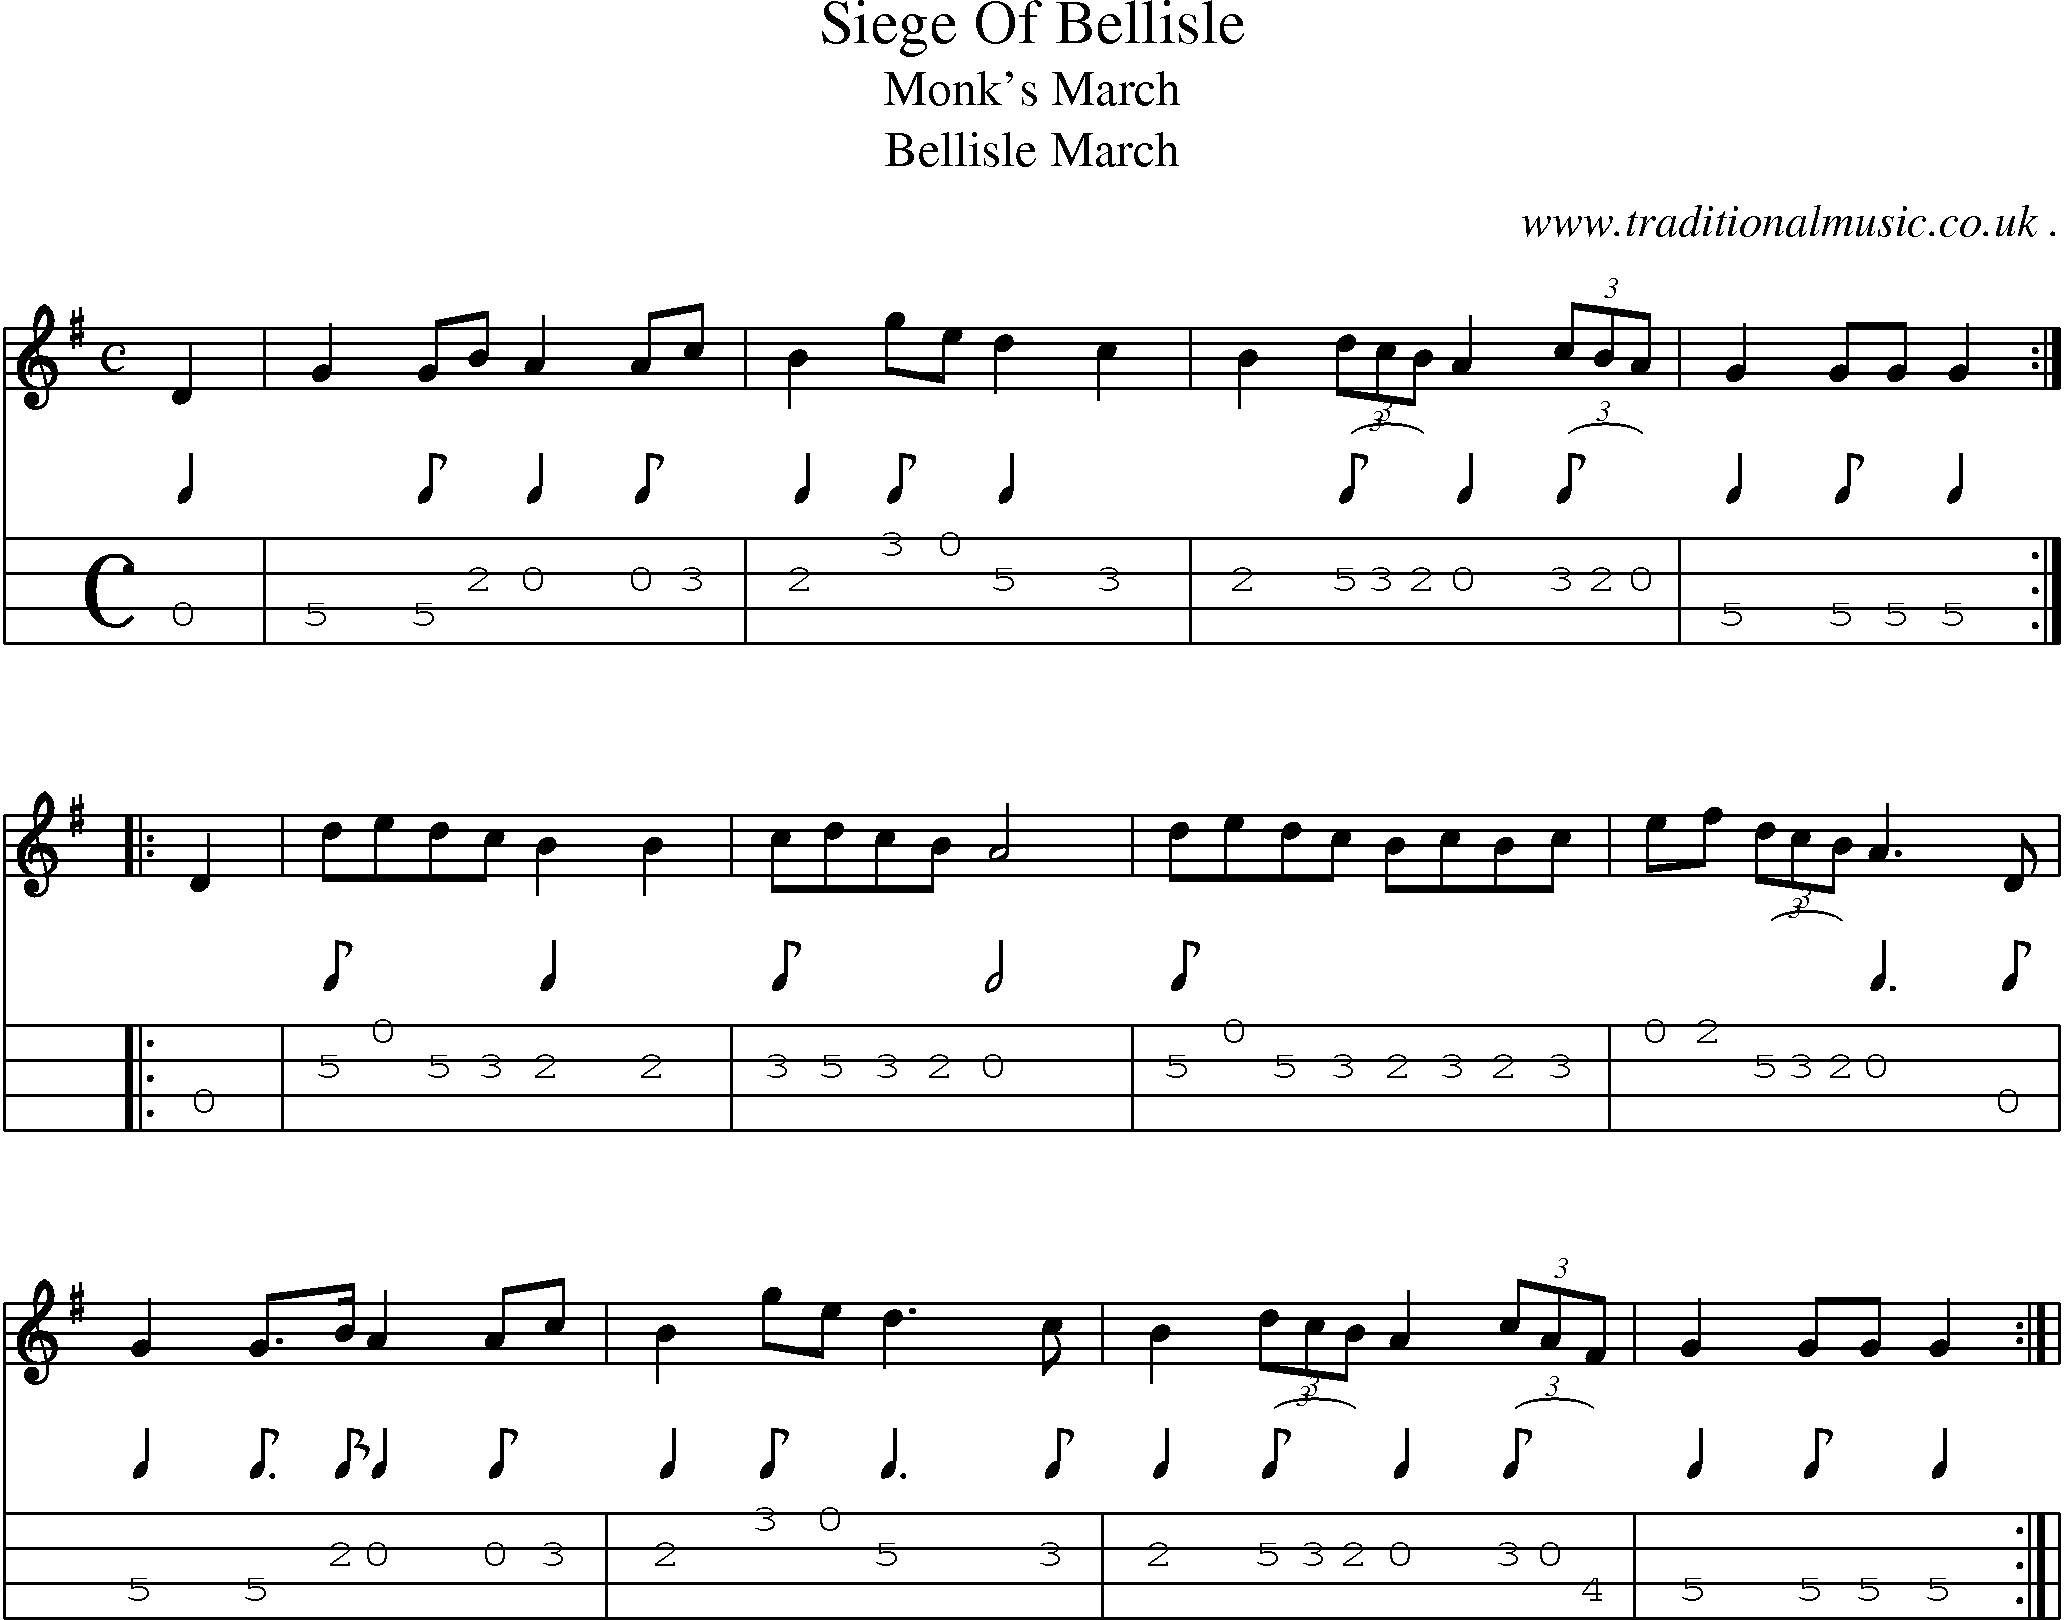 Sheet-Music and Mandolin Tabs for Siege Of Bellisle